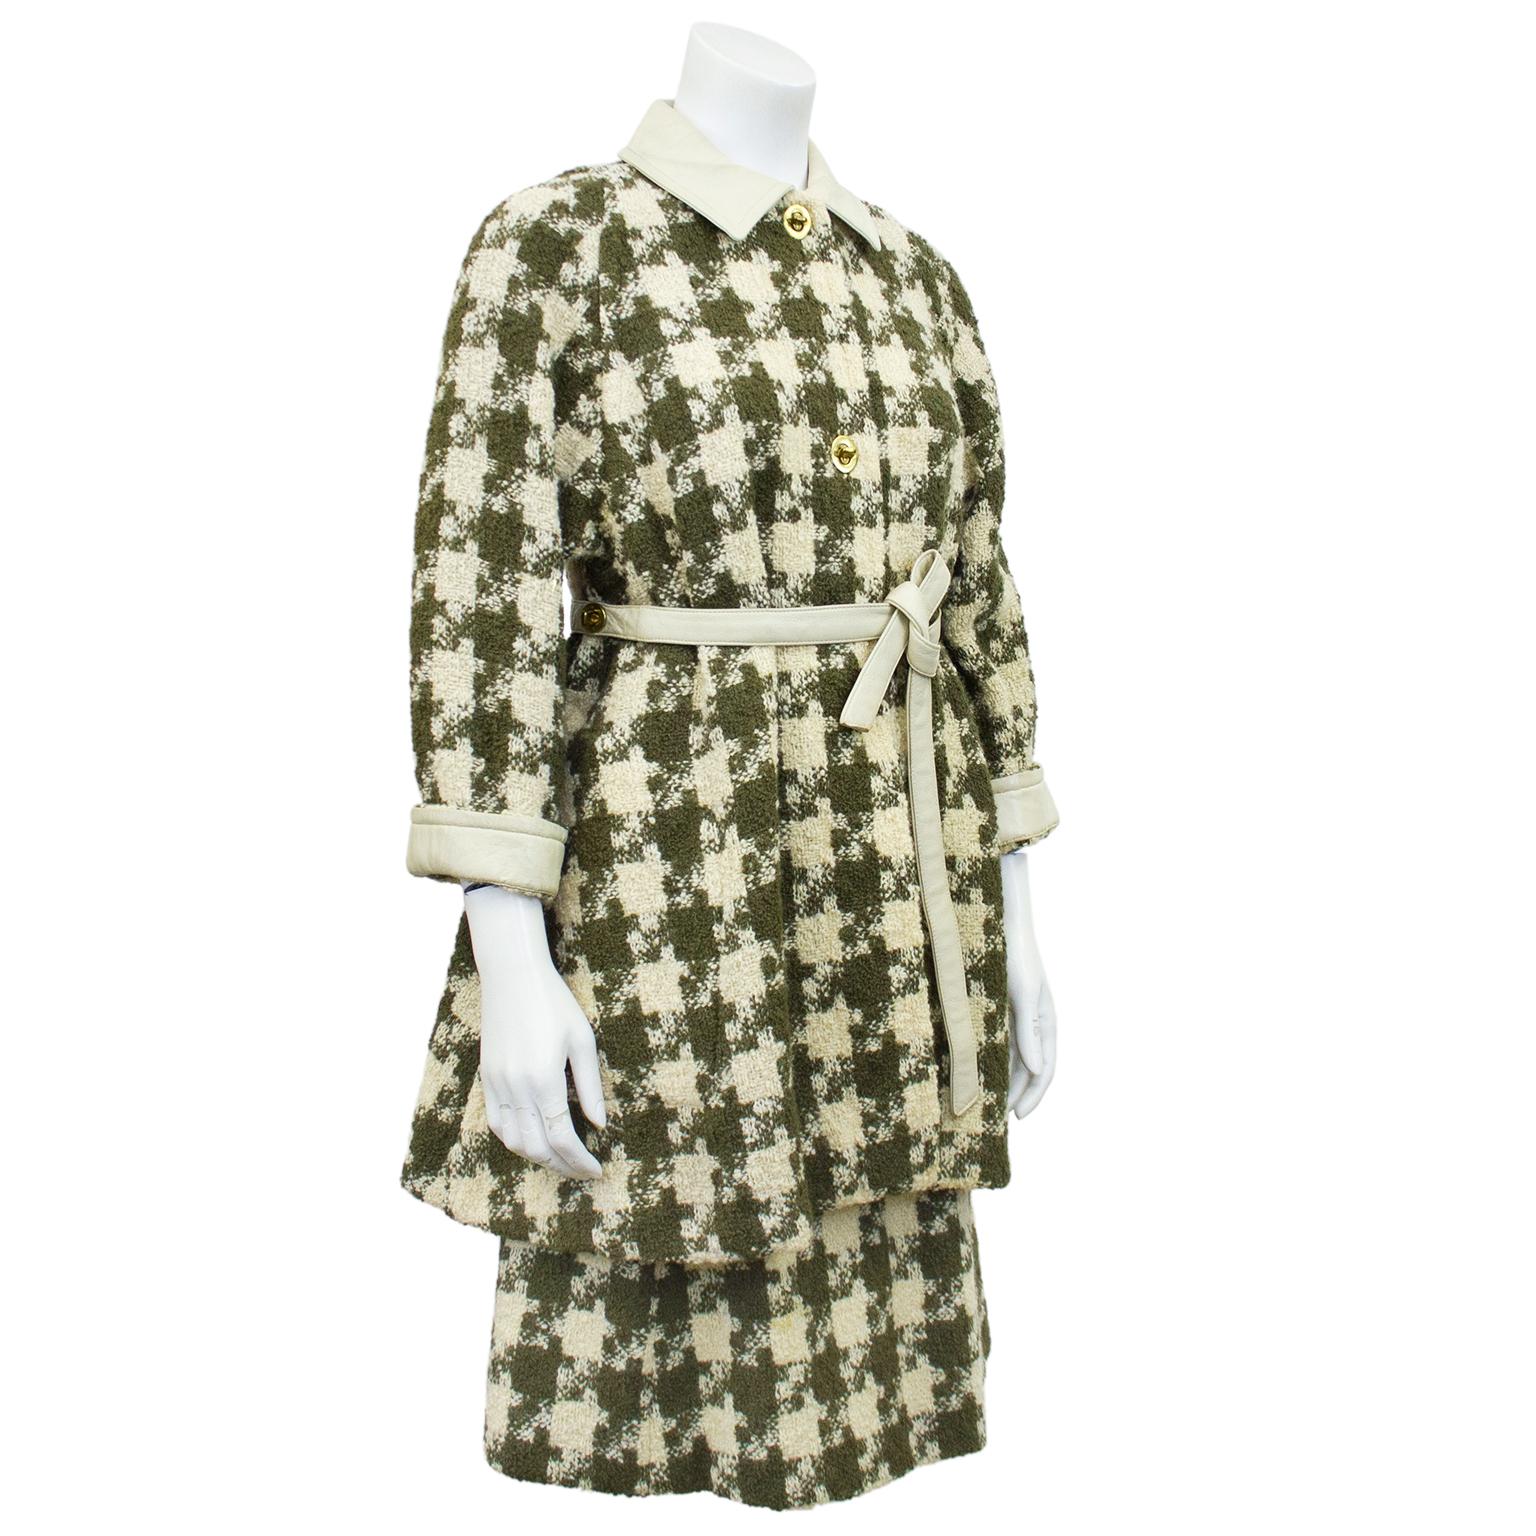 Darling Bonnie Cashin coat and skirt wool ensemble from the 1970s featuring an oversized cream and sage green allover houndstooth pattern. Cream leather collars, cuffs, belt and trim, and gold tone twist button closures. Jacket is long sleeve, but